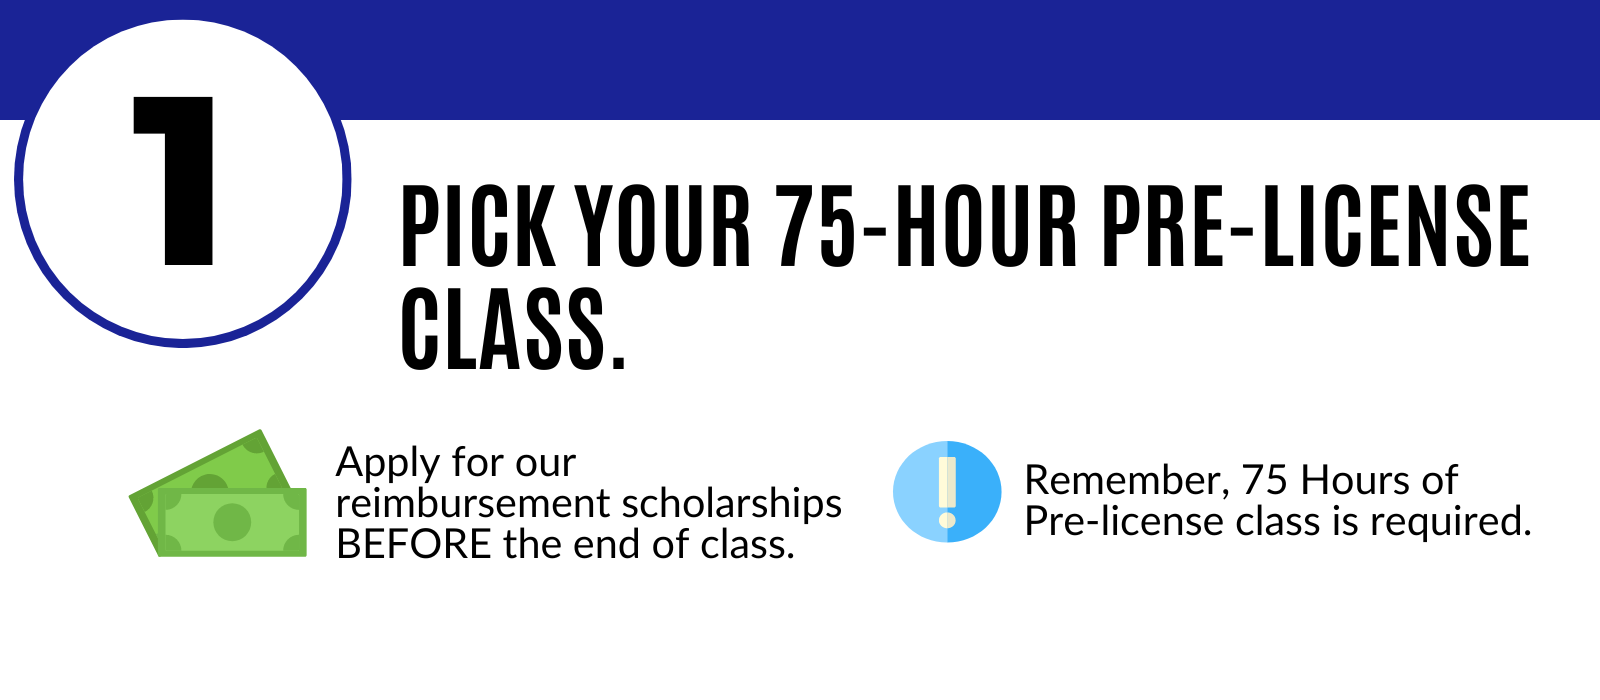 step 1: pick your 75-hour pre-license class